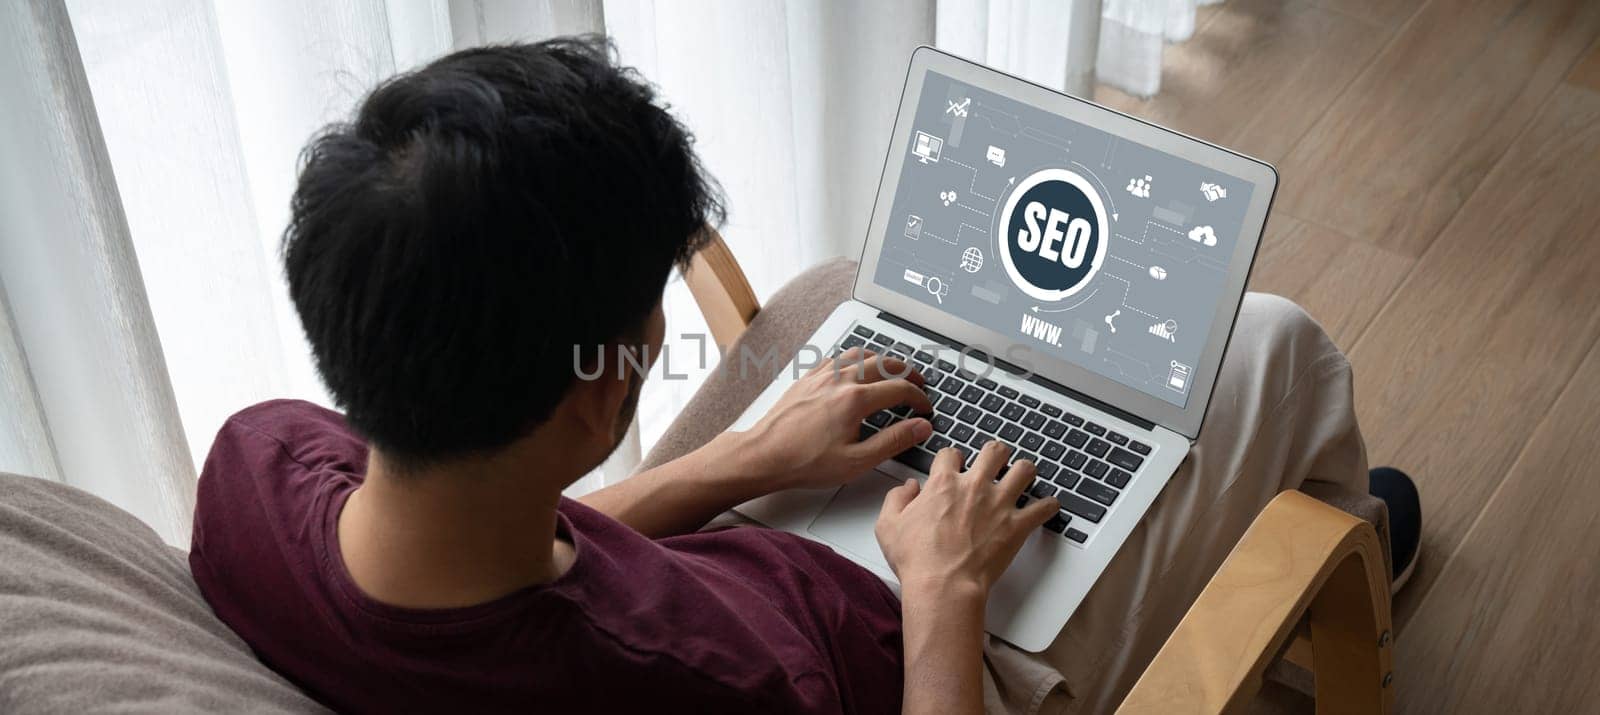 SEO search engine optimization for modish e-commerce and online retail business showing on computer screen